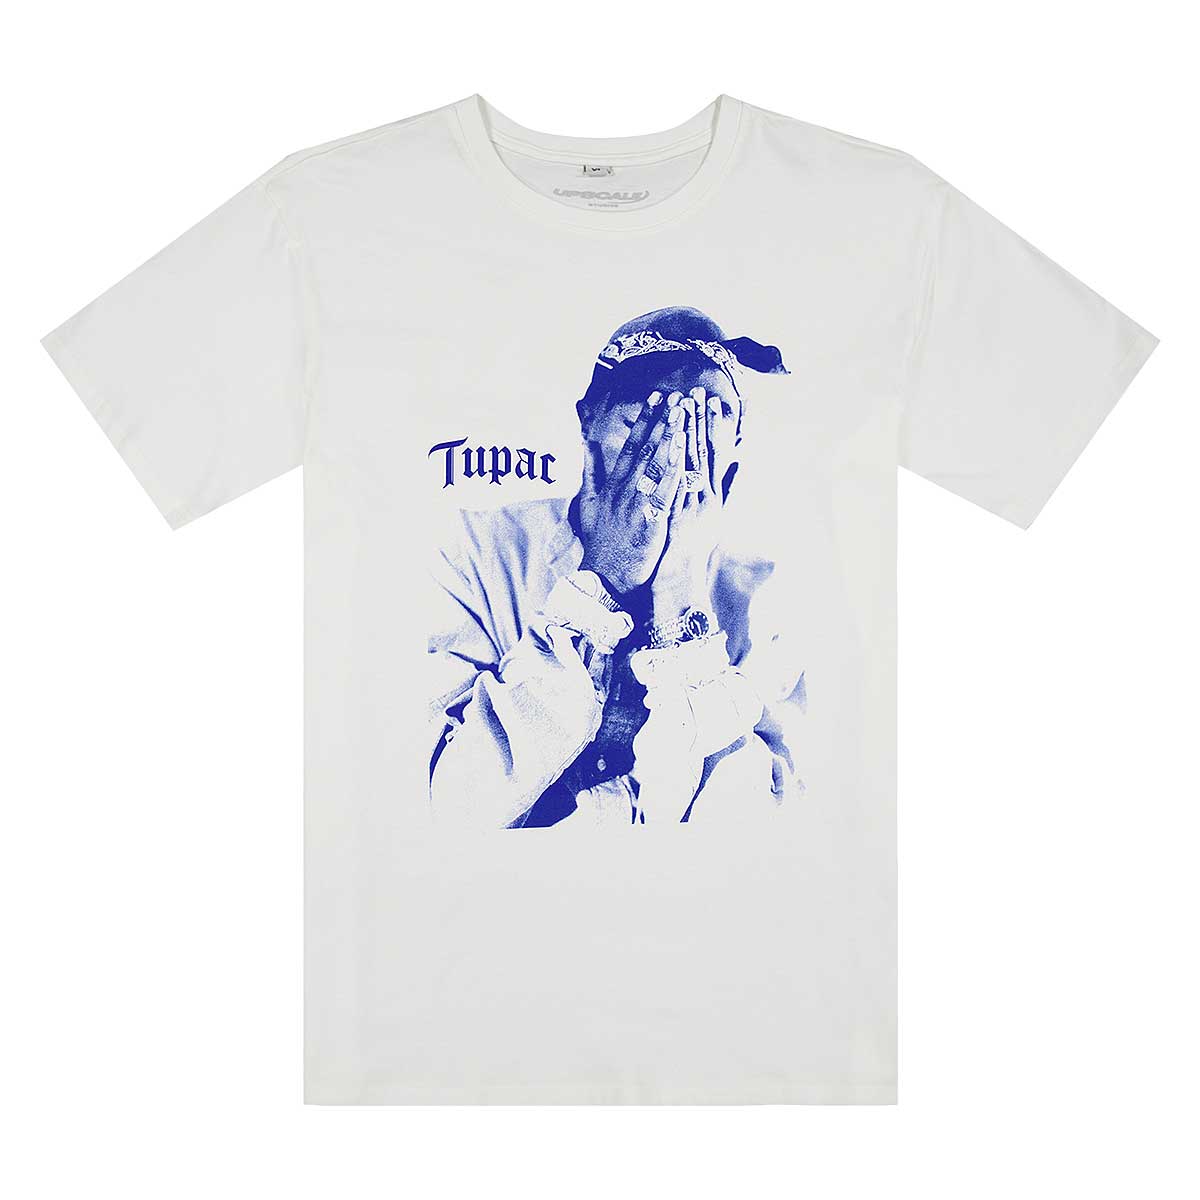 Image of Mister Tee 2pac Me Aigainst The World Oversize Tee, White/black/red